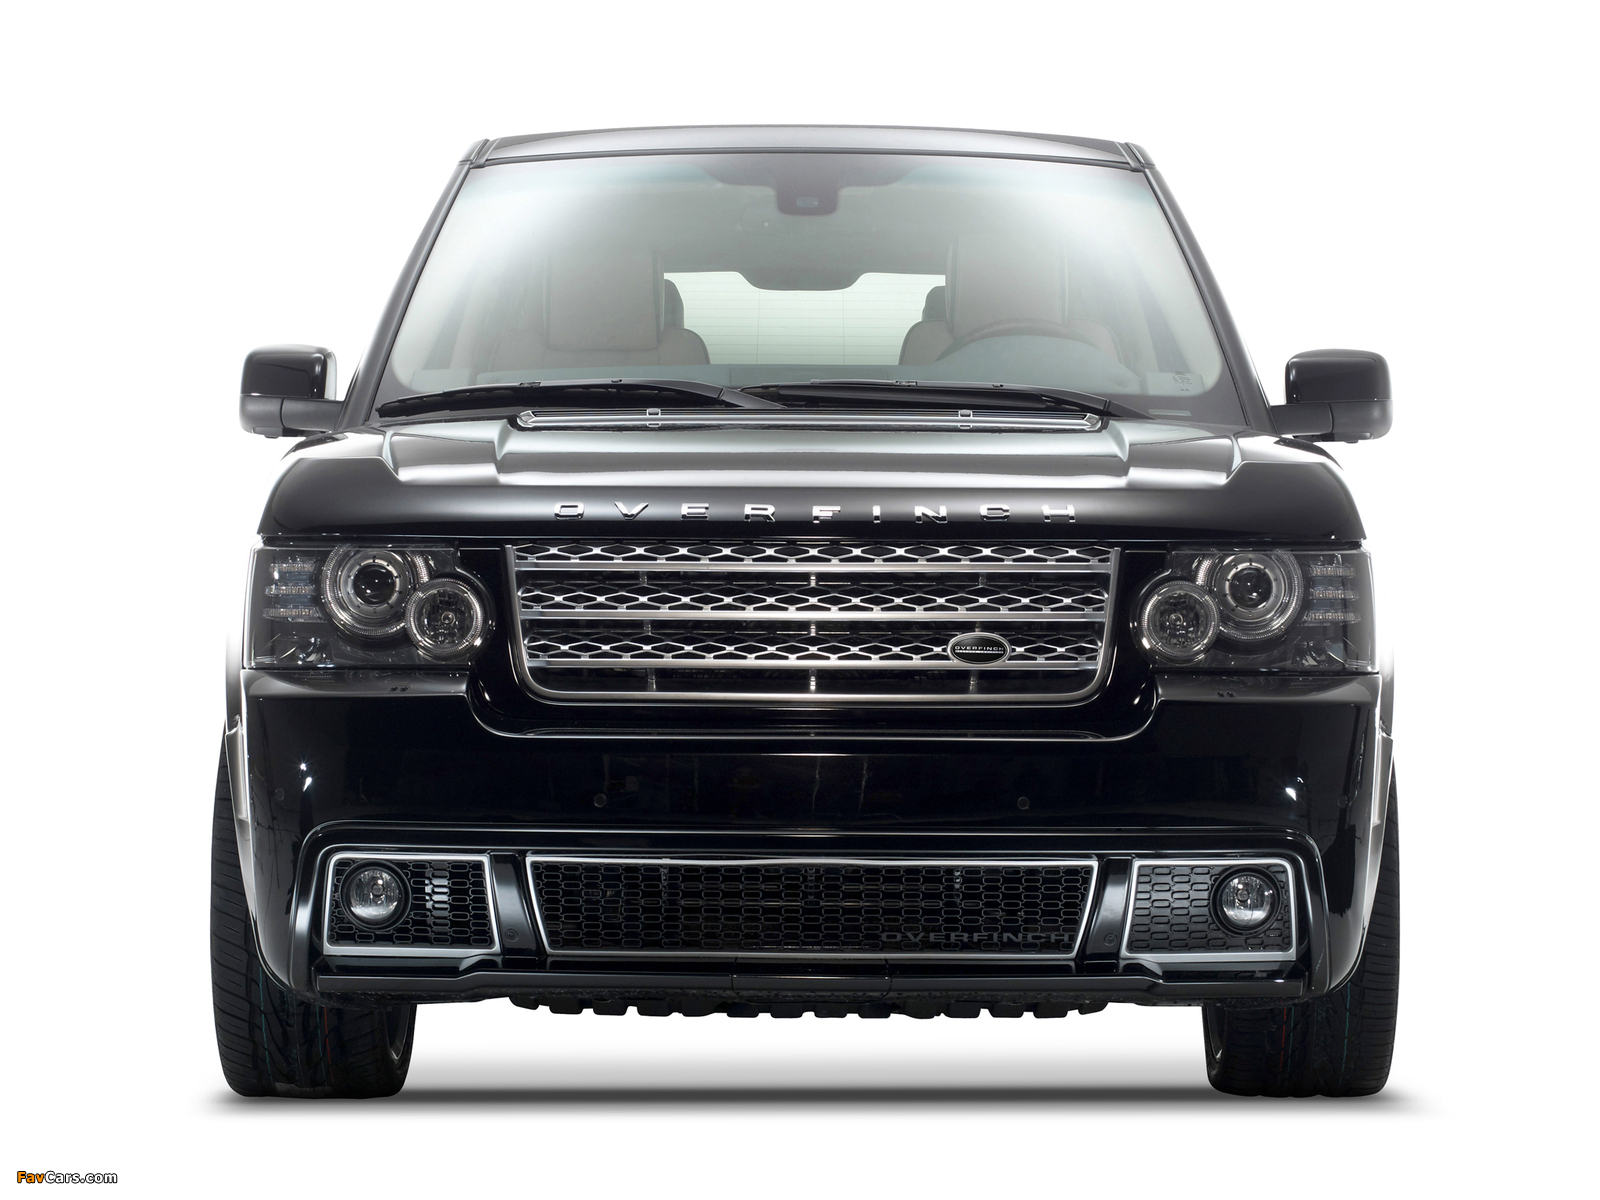 Overfinch Range Rover Supercharged Royale (L322) 2009 pictures (1600 x 1200)